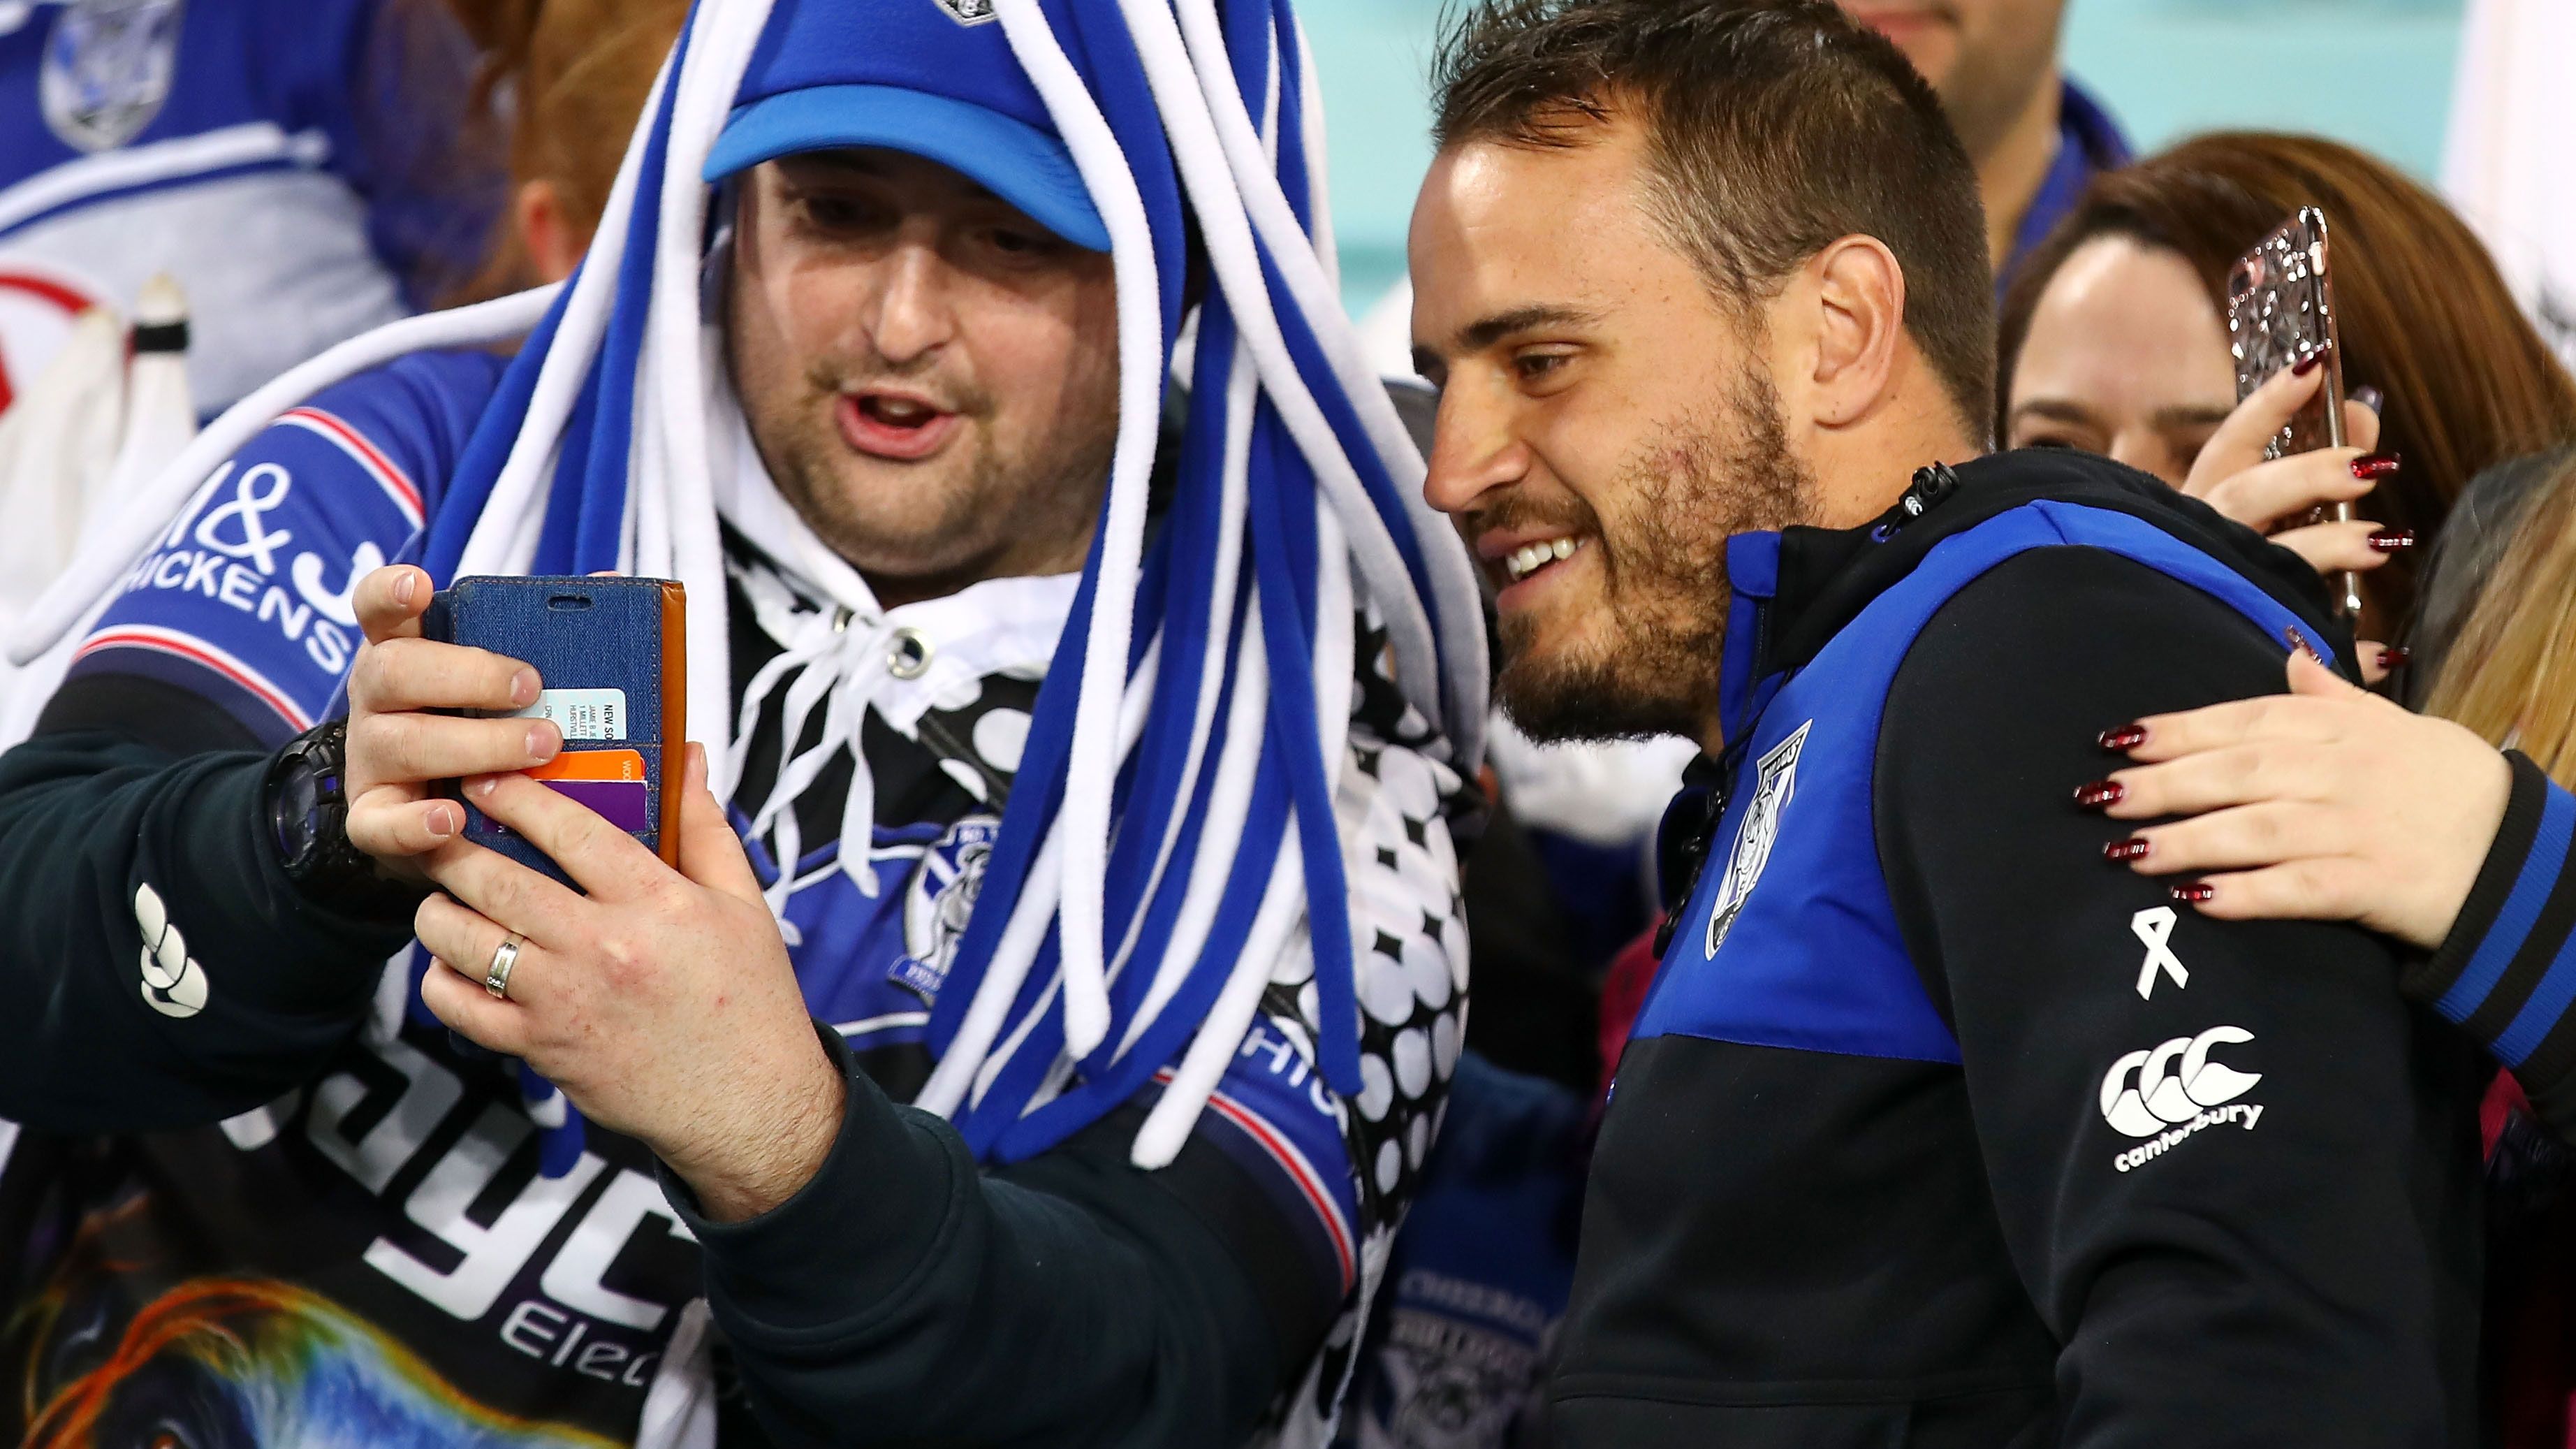 Josh Reynolds poses with the crowd after the Bulldogs&#x27; final home game of the season in round 24, 2017.